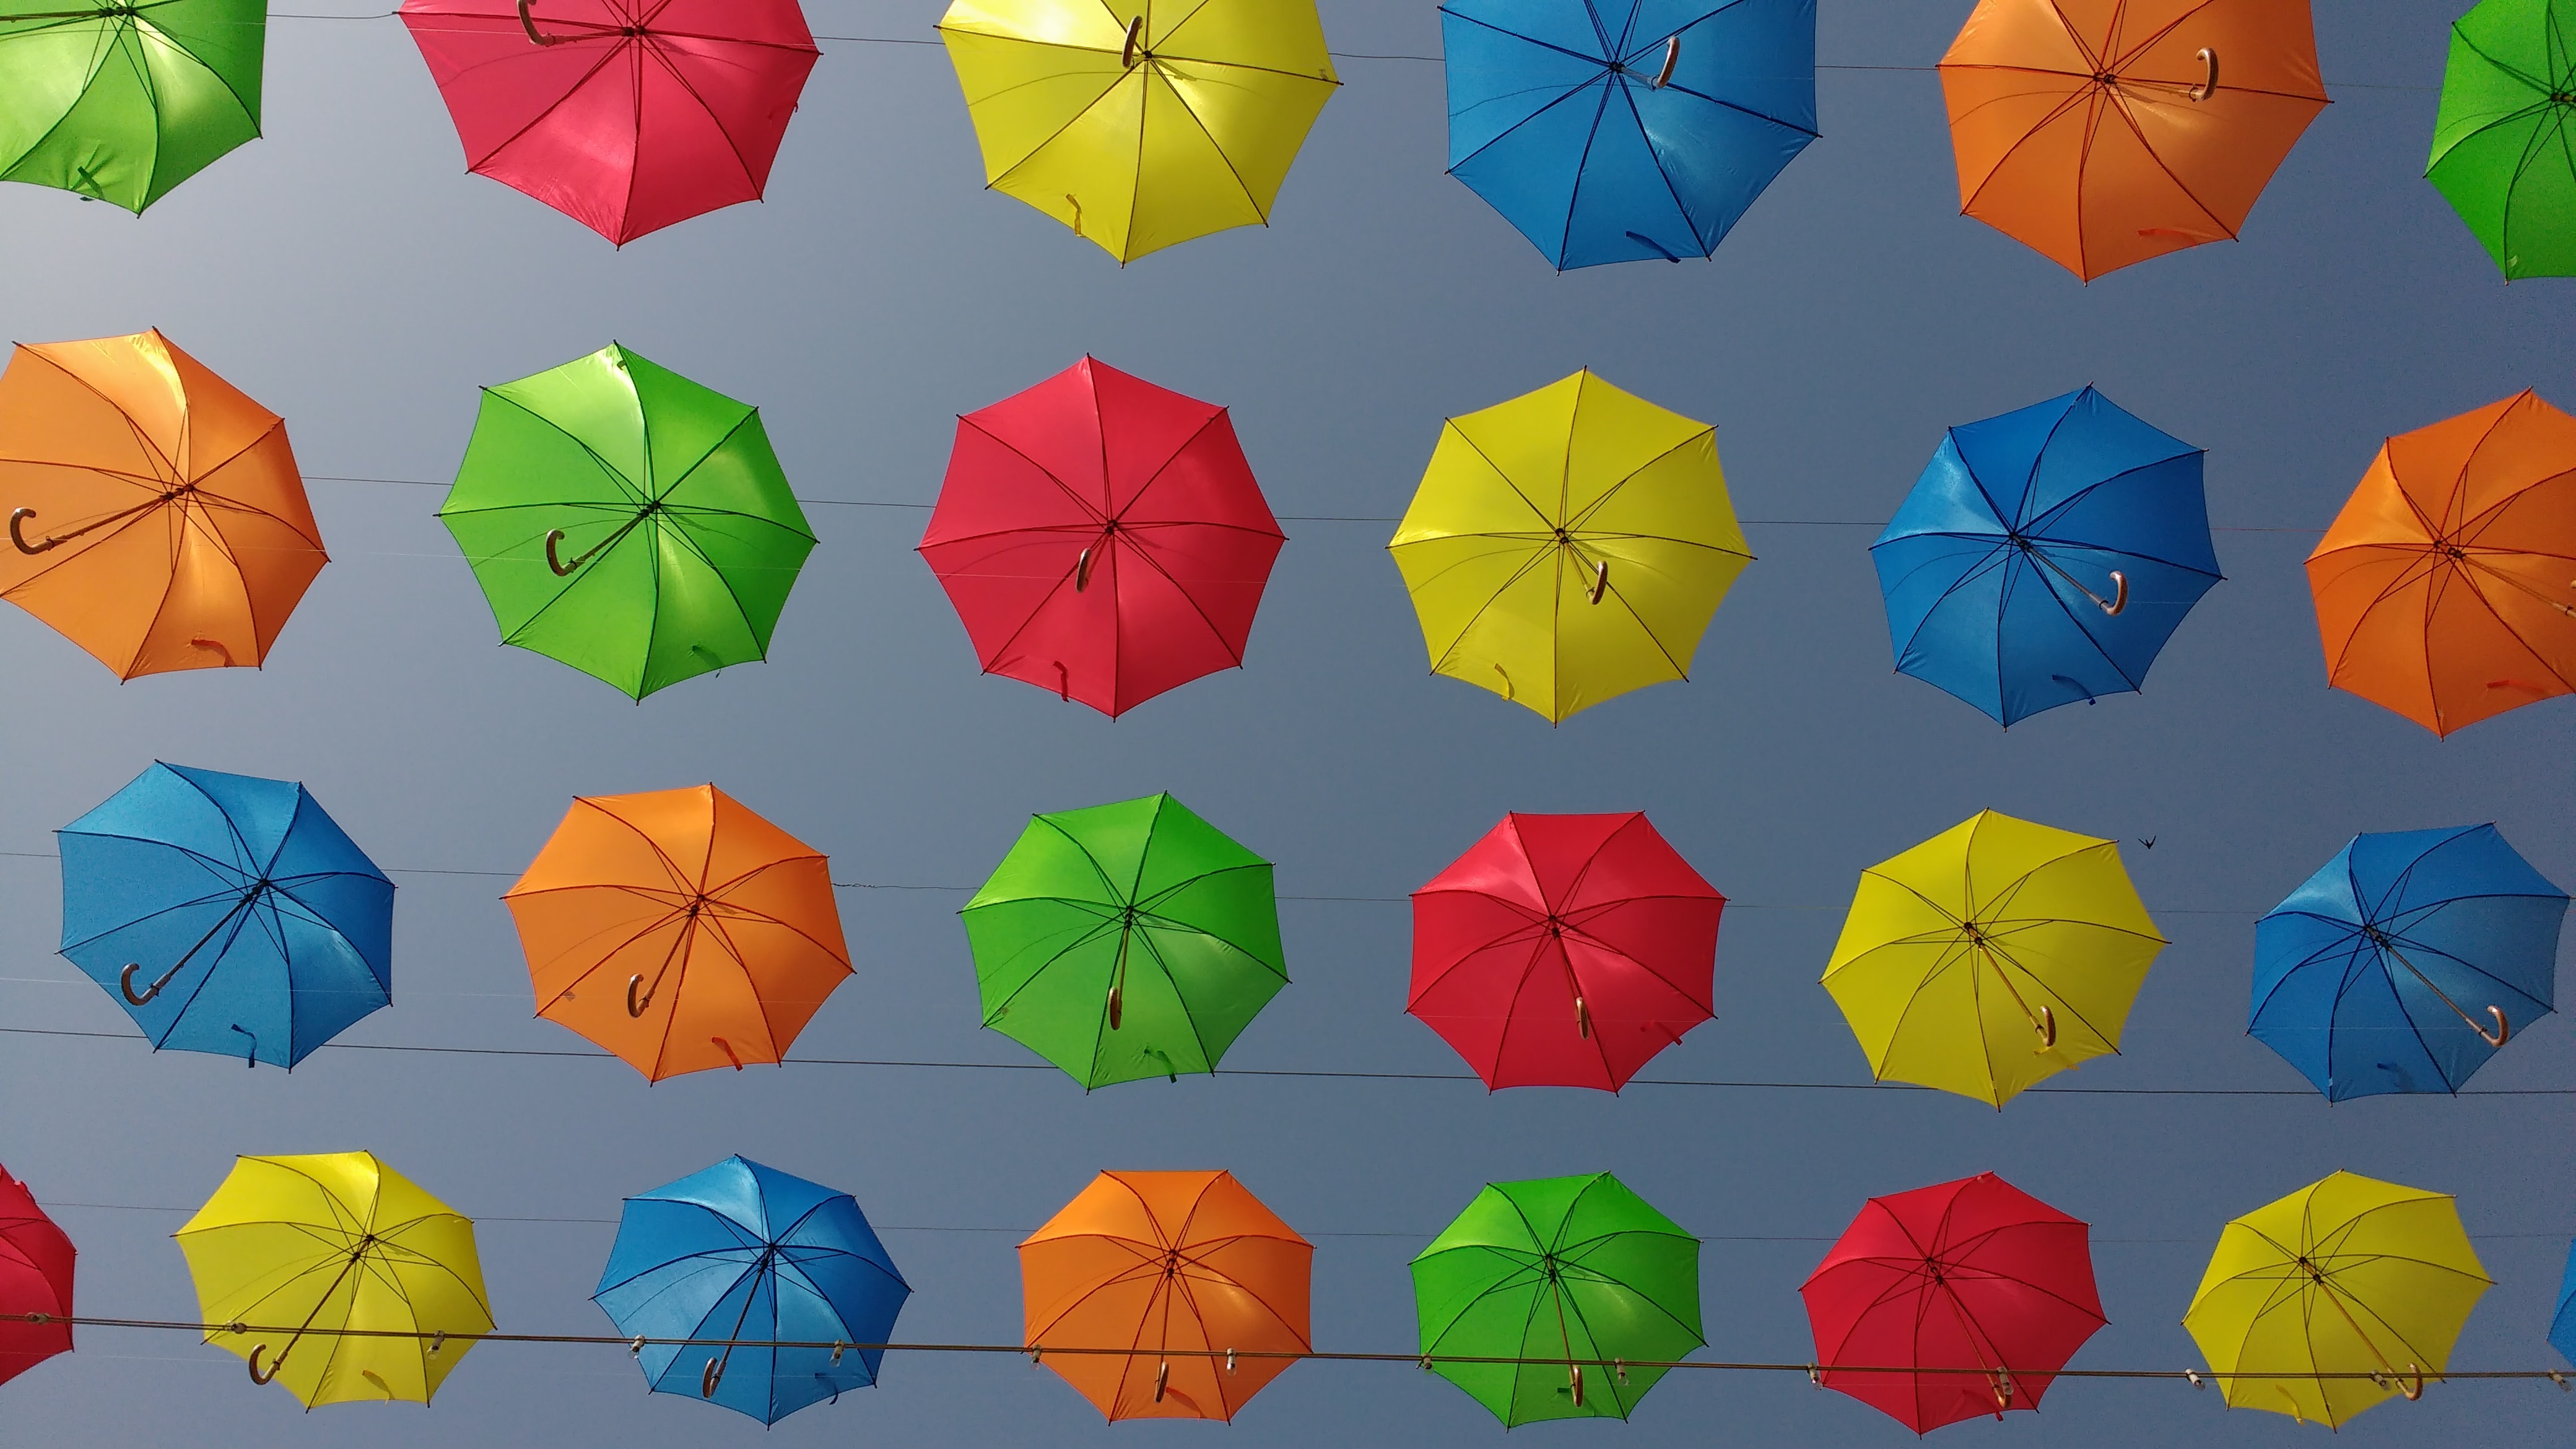 A collection of bright colourful umbrellas in red, yellow, blue, and green against a blue sky